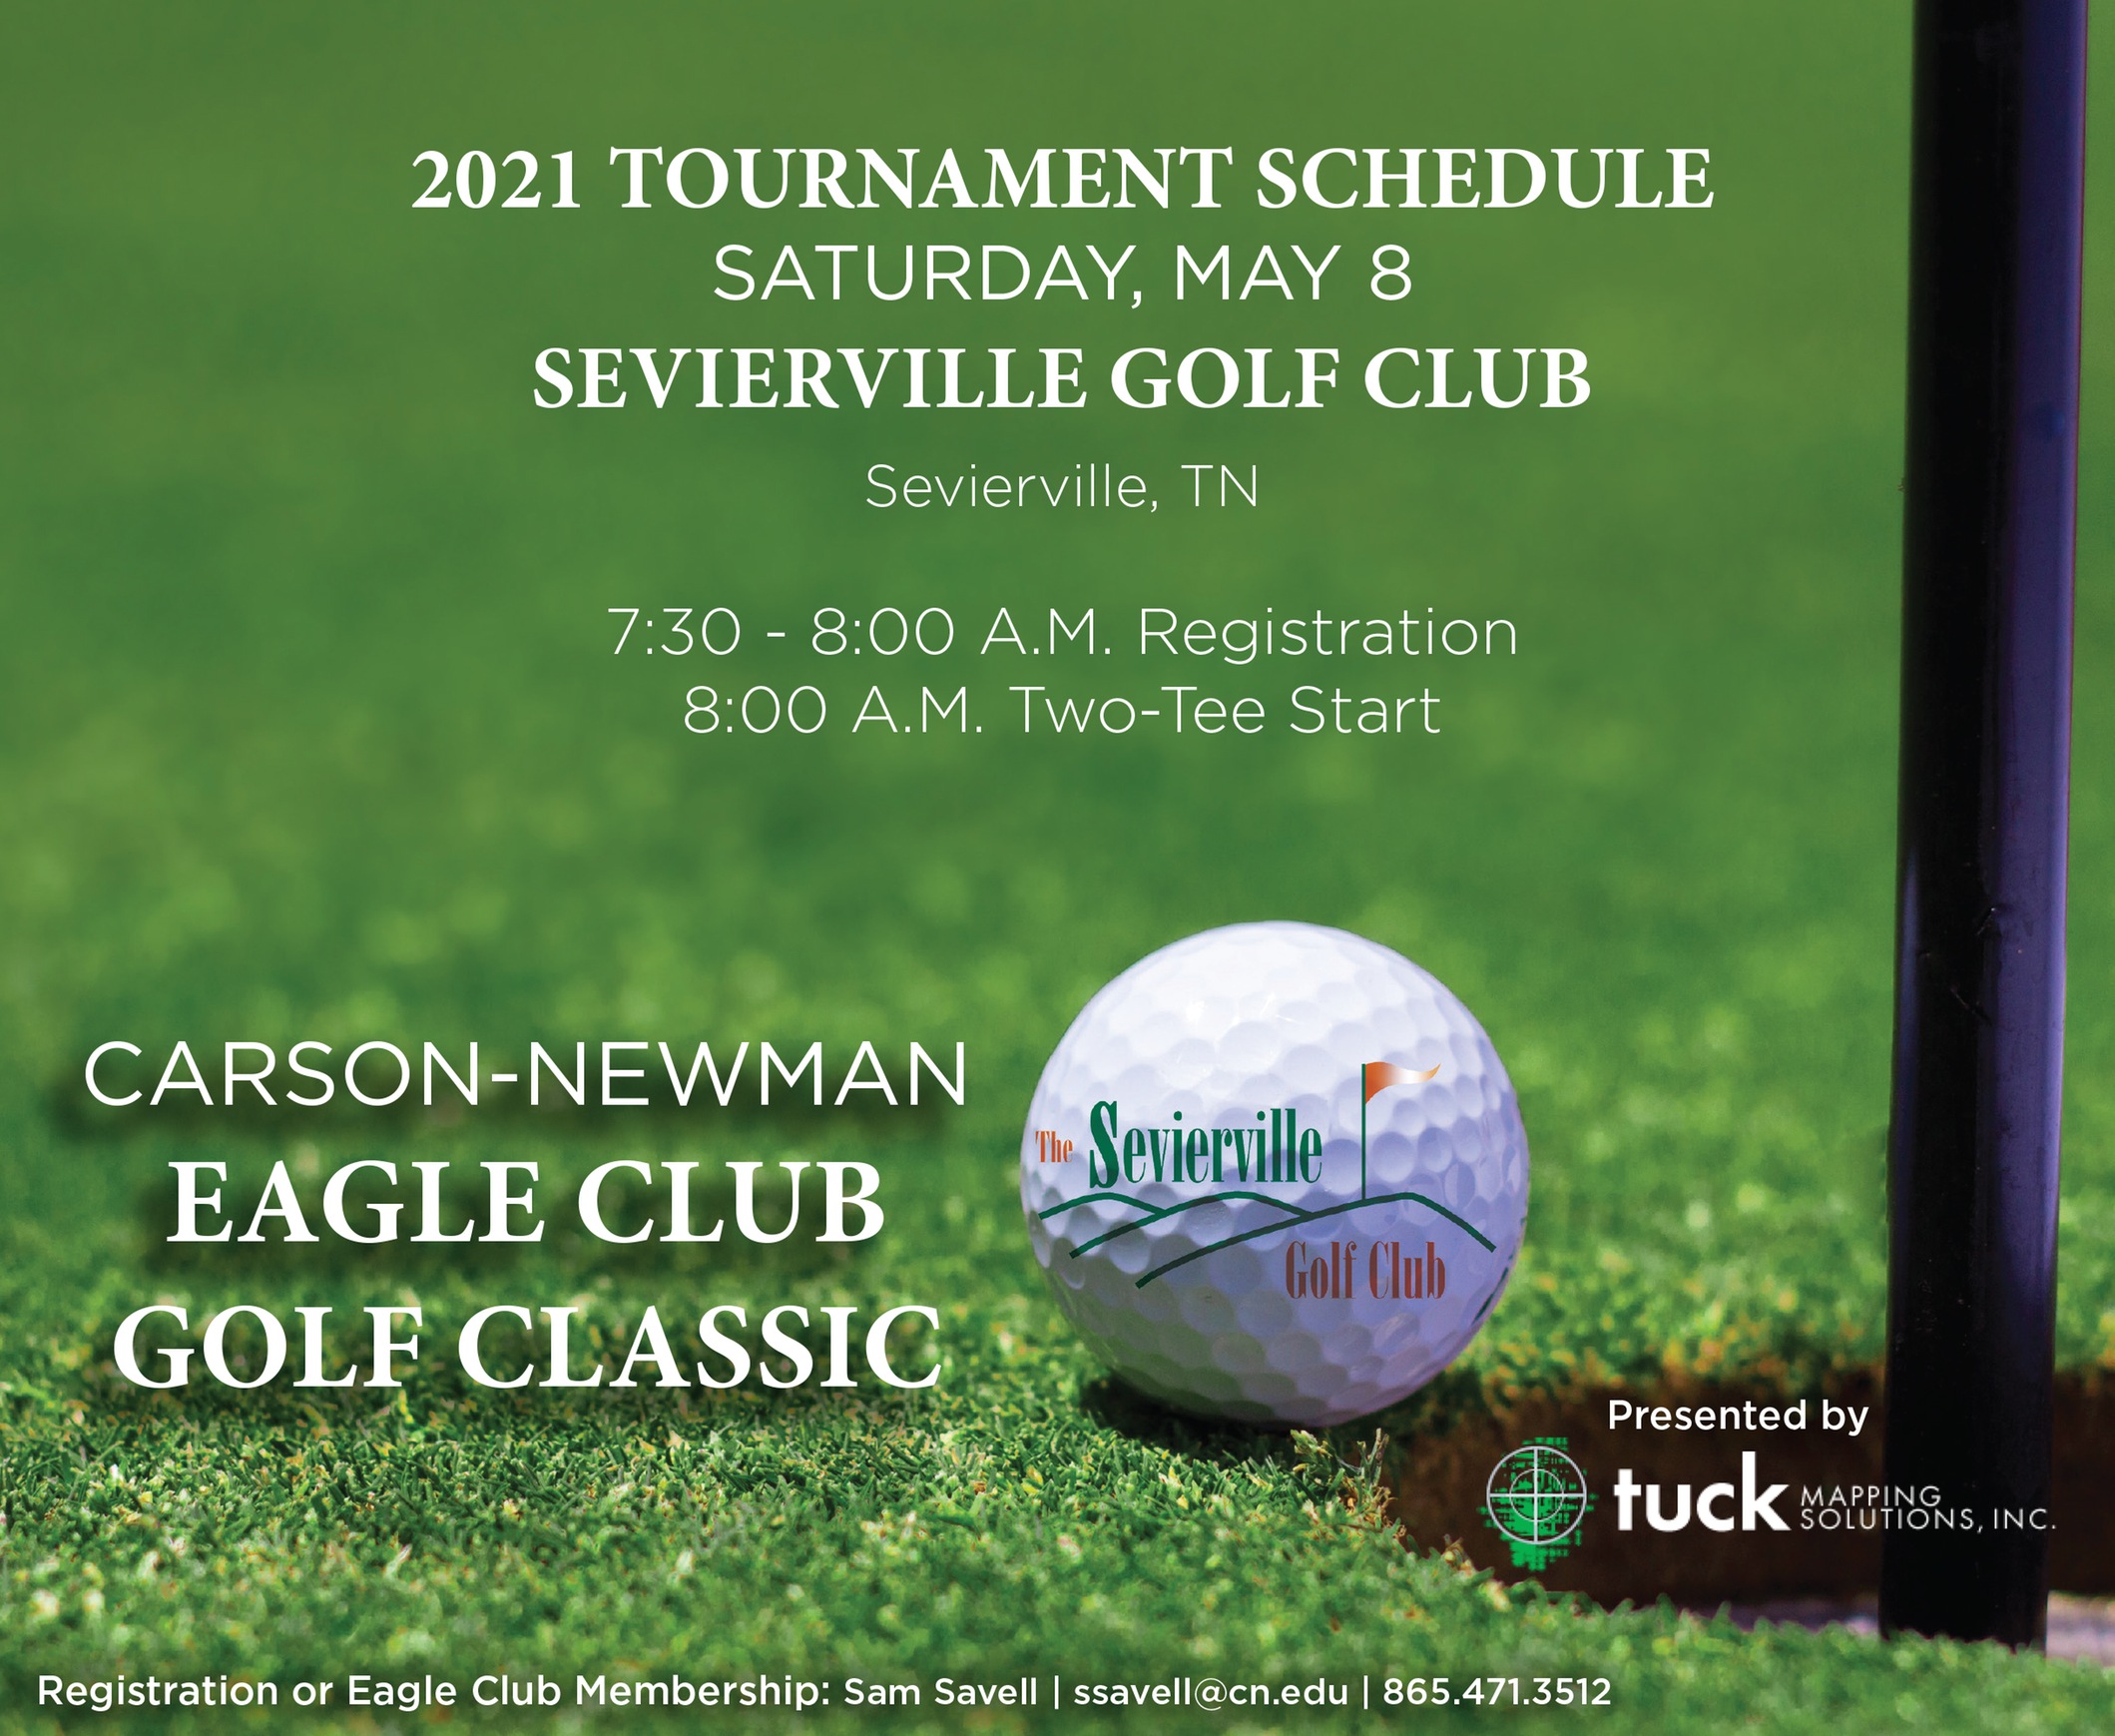 Eagle Club Golf Classic set for May 8